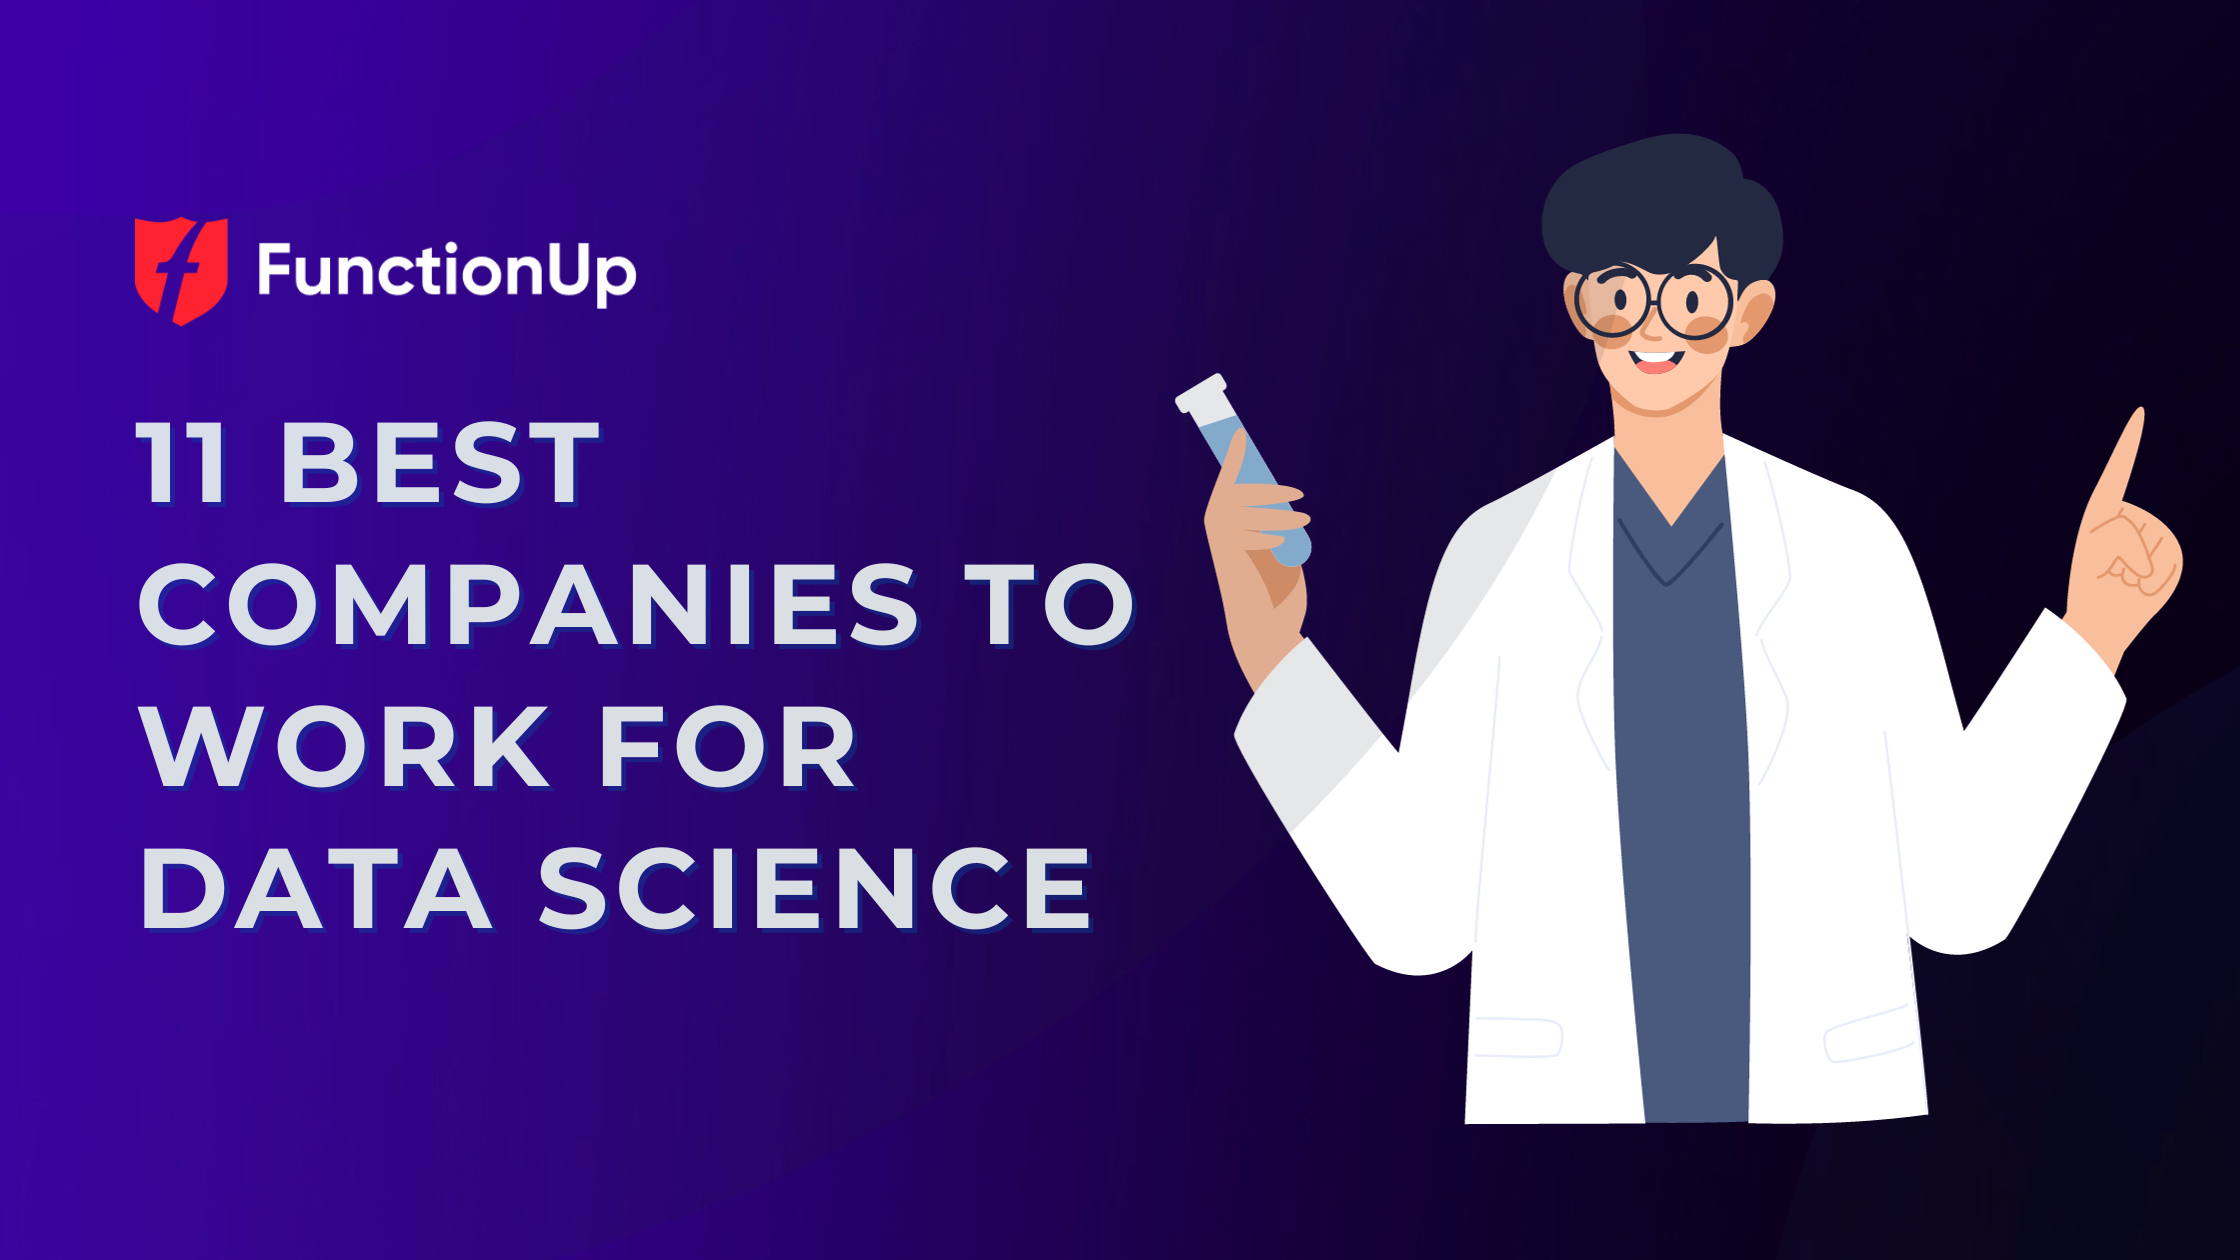 This list of best data science companies aims to go beyond the usual and expected. Some great and perhaps underrated options to get a job as a data scientist.